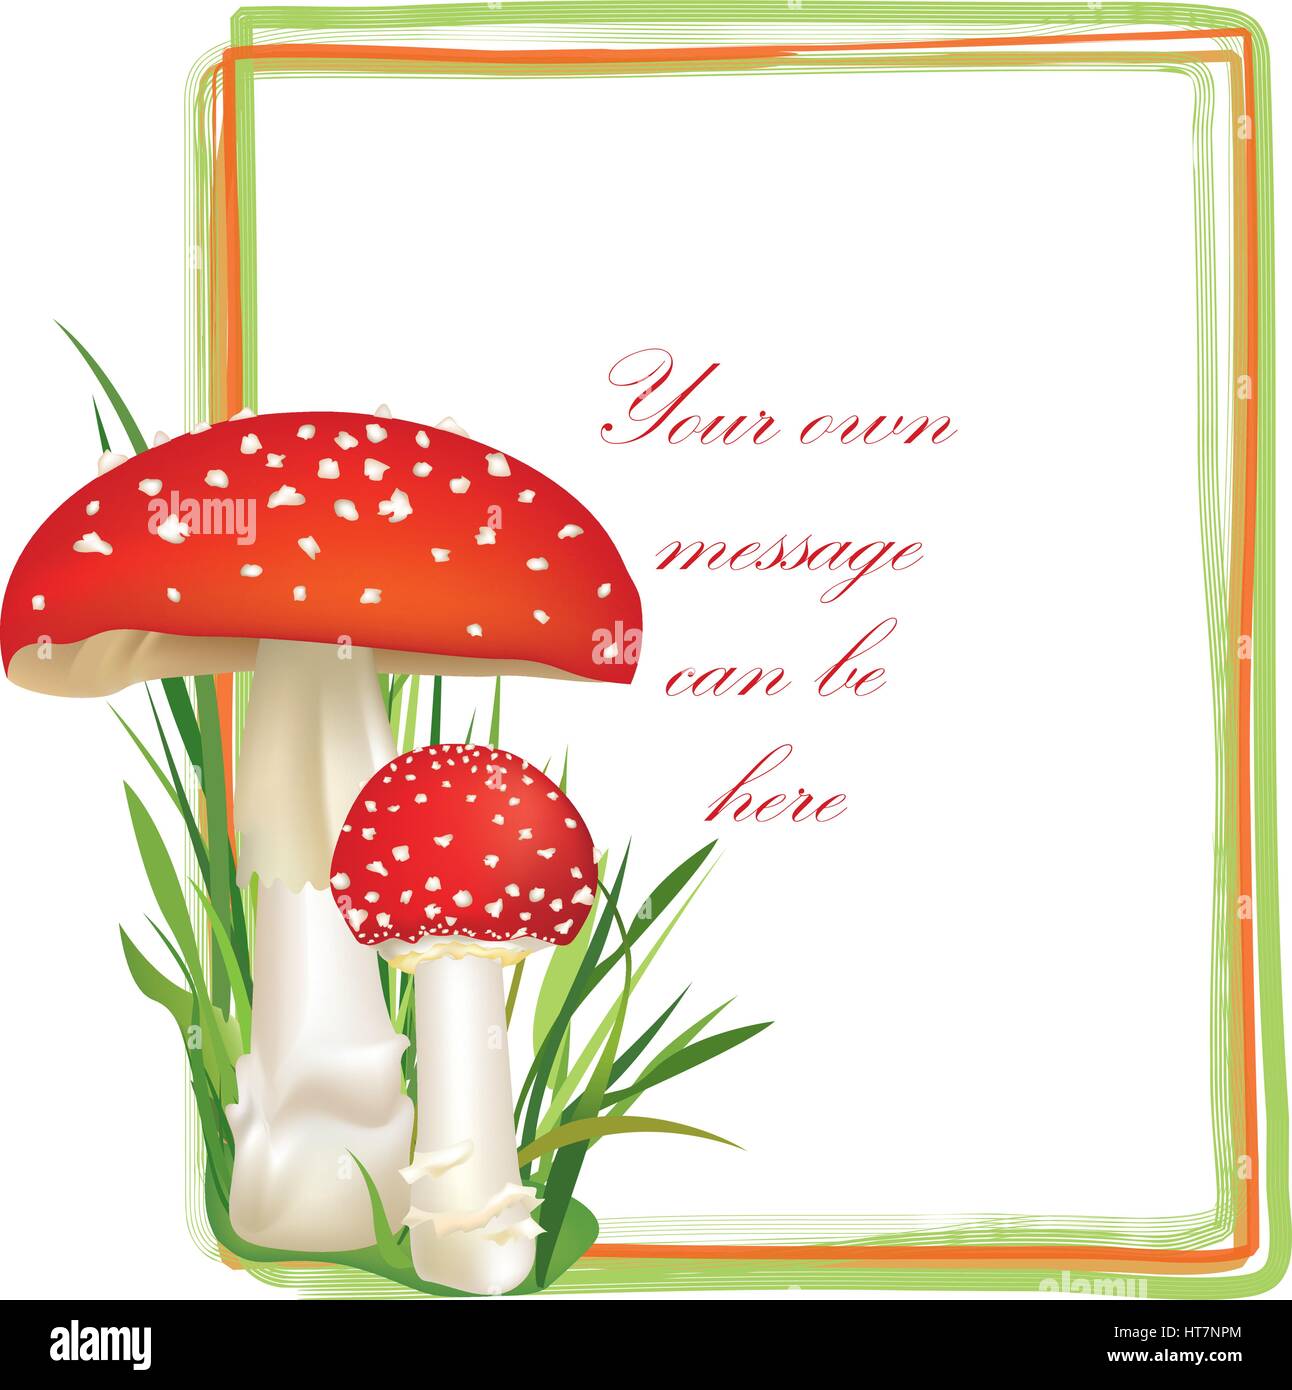 Red poison mushroom. Autumn frame with copy space. Floral fall border isolated on white background. Stock Vector